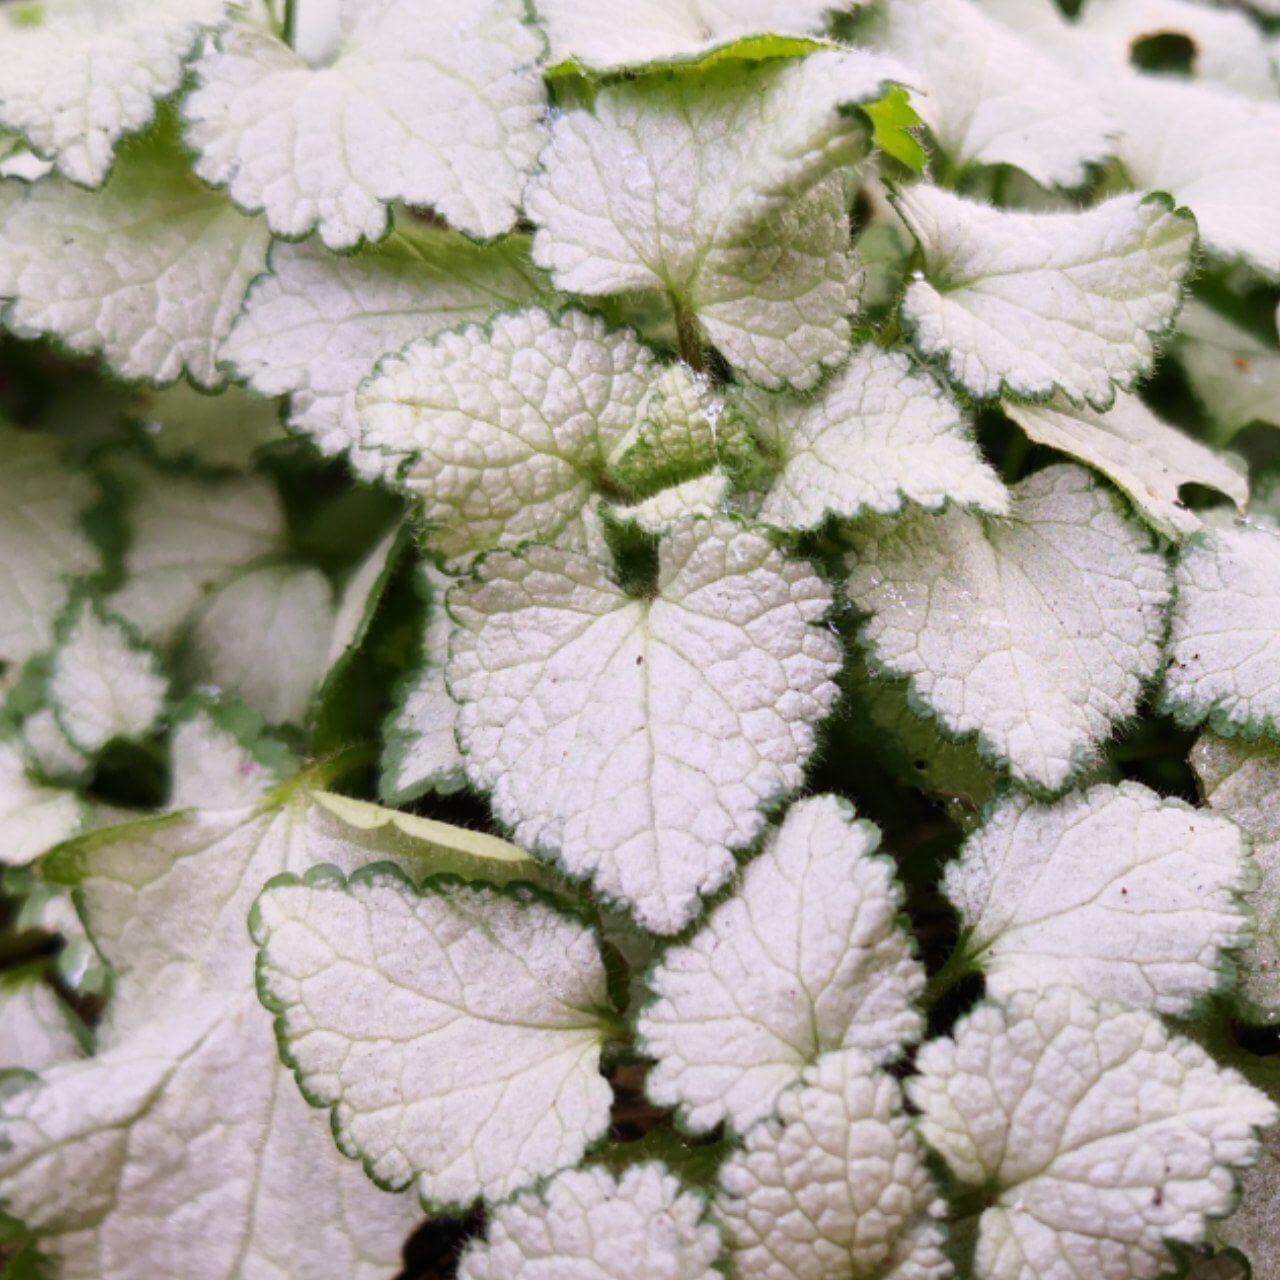 Feature image of Spotted deadnettle